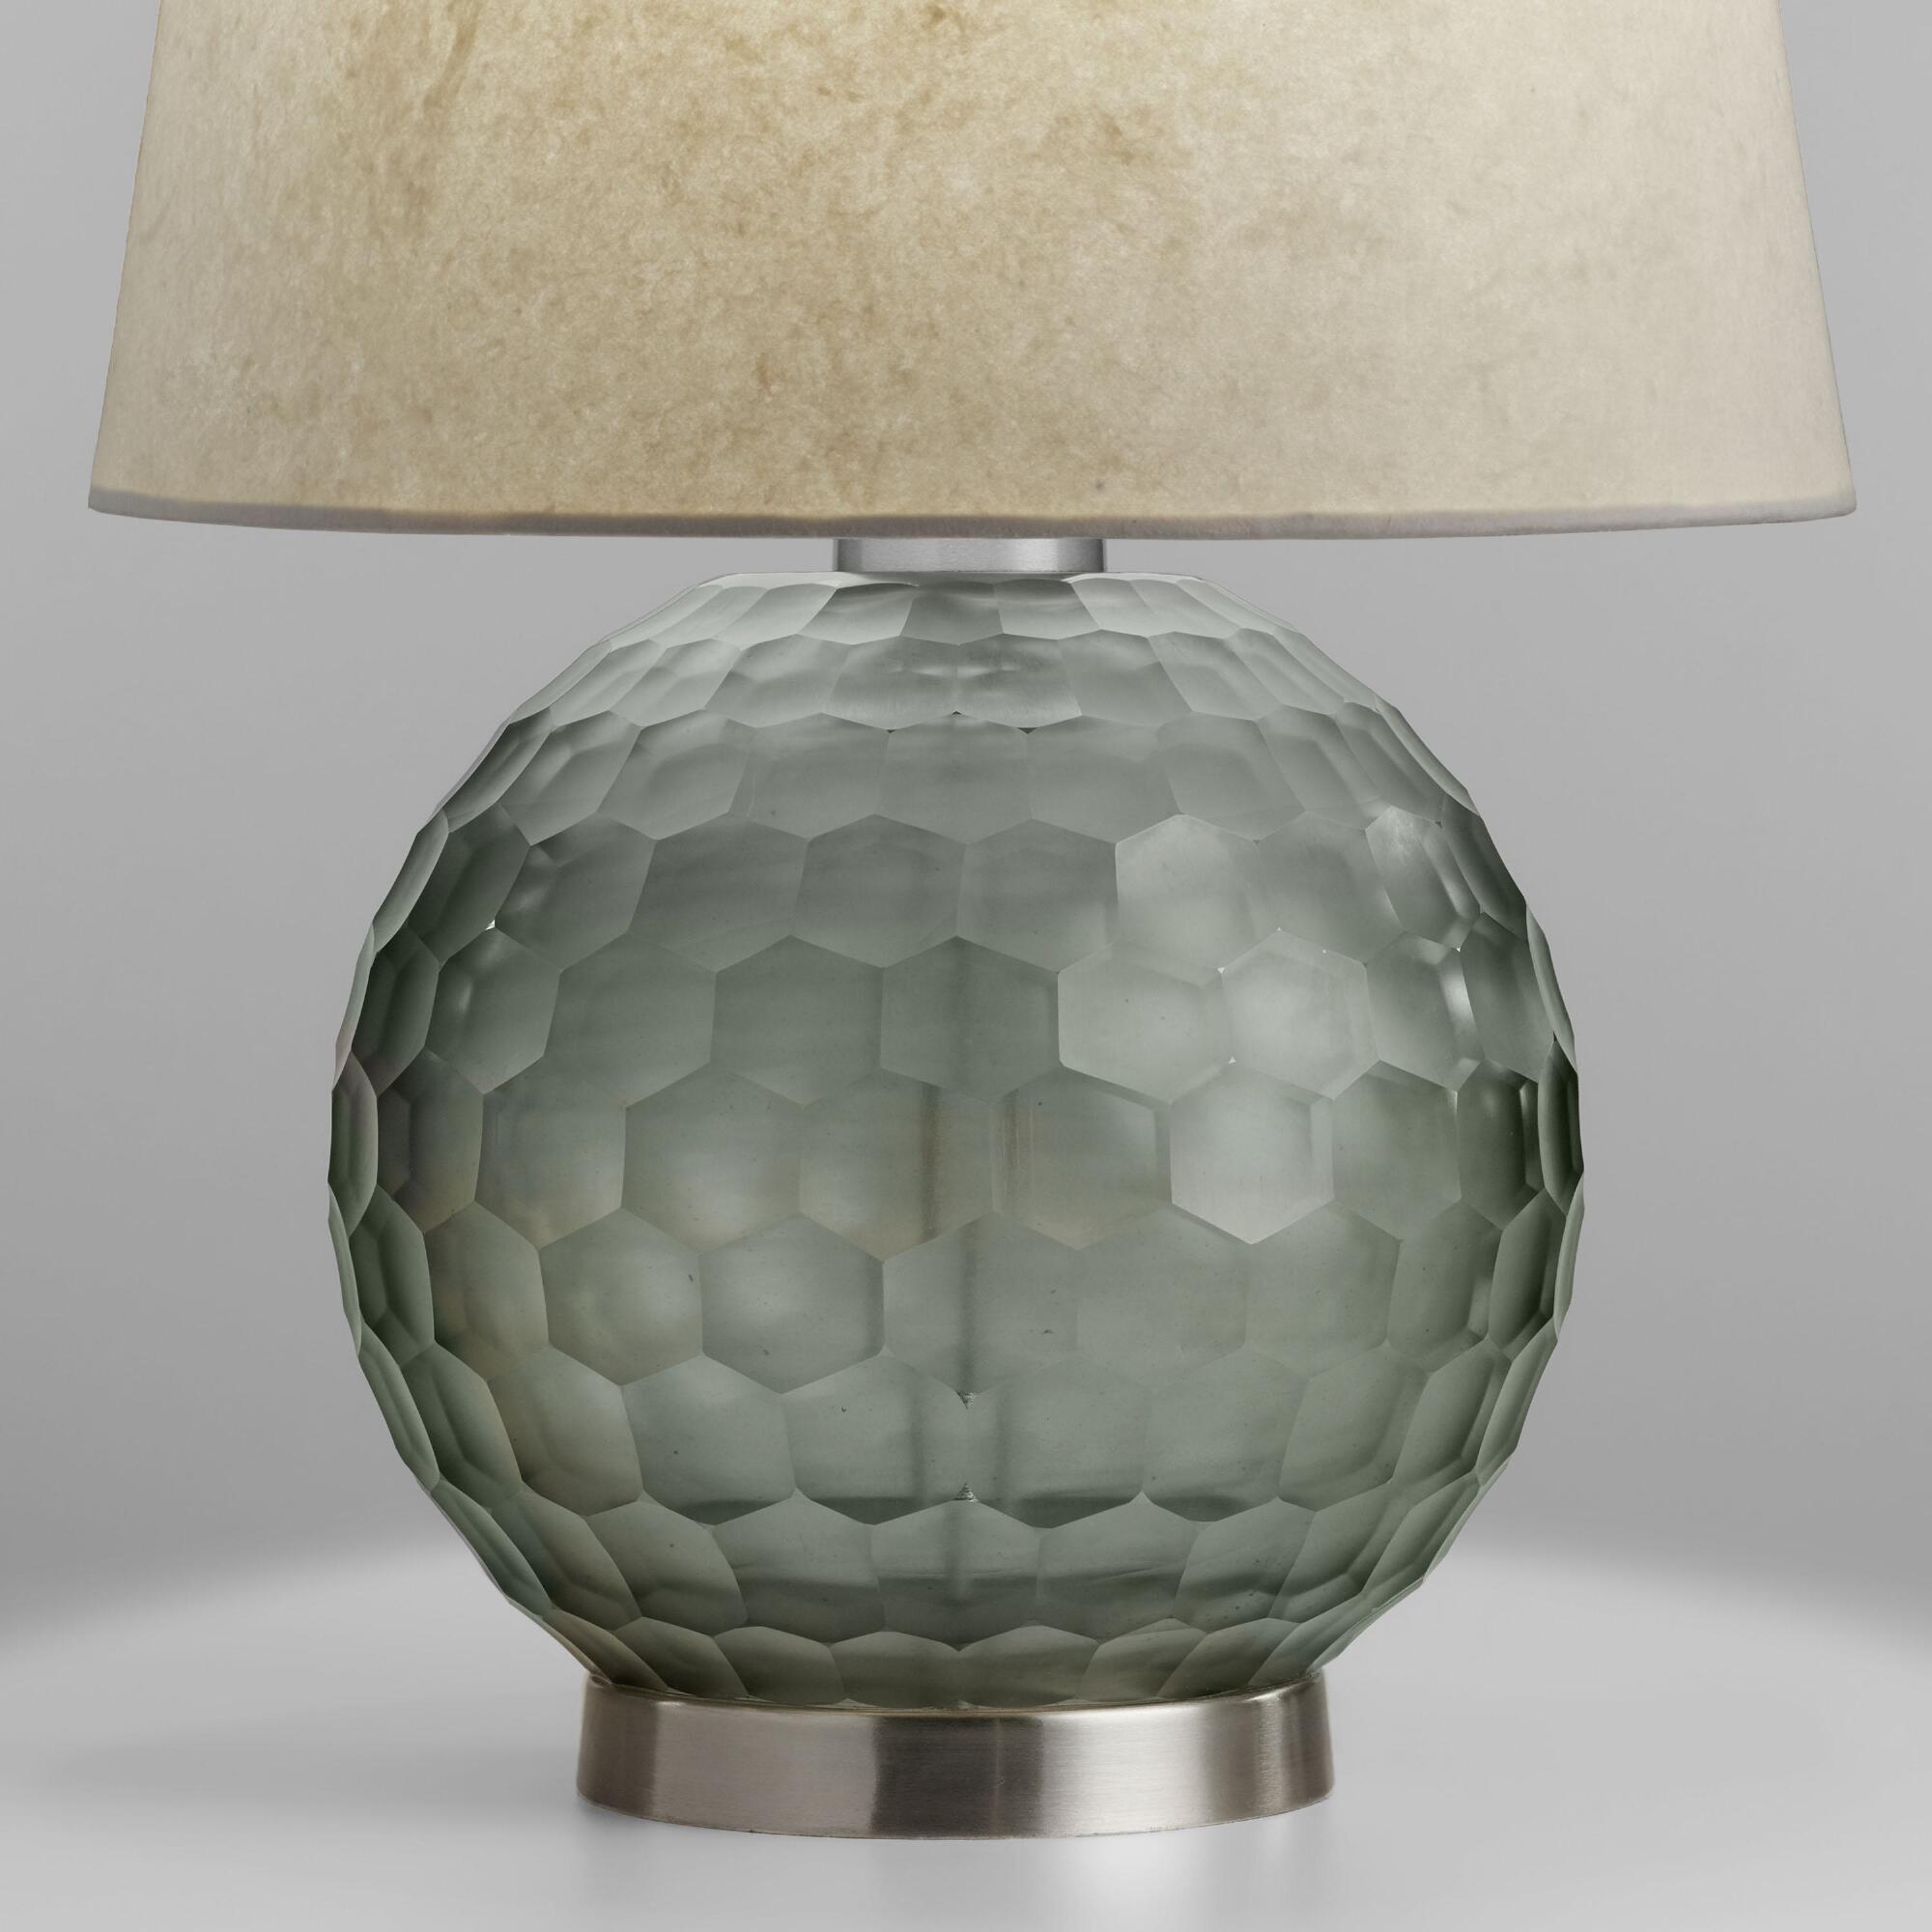 smoke gray faceted glass orb freya table lamp base world market iipsrv fcgi round accent stained shades modern dining room sets wicker outdoor the range bedside lamps small drop